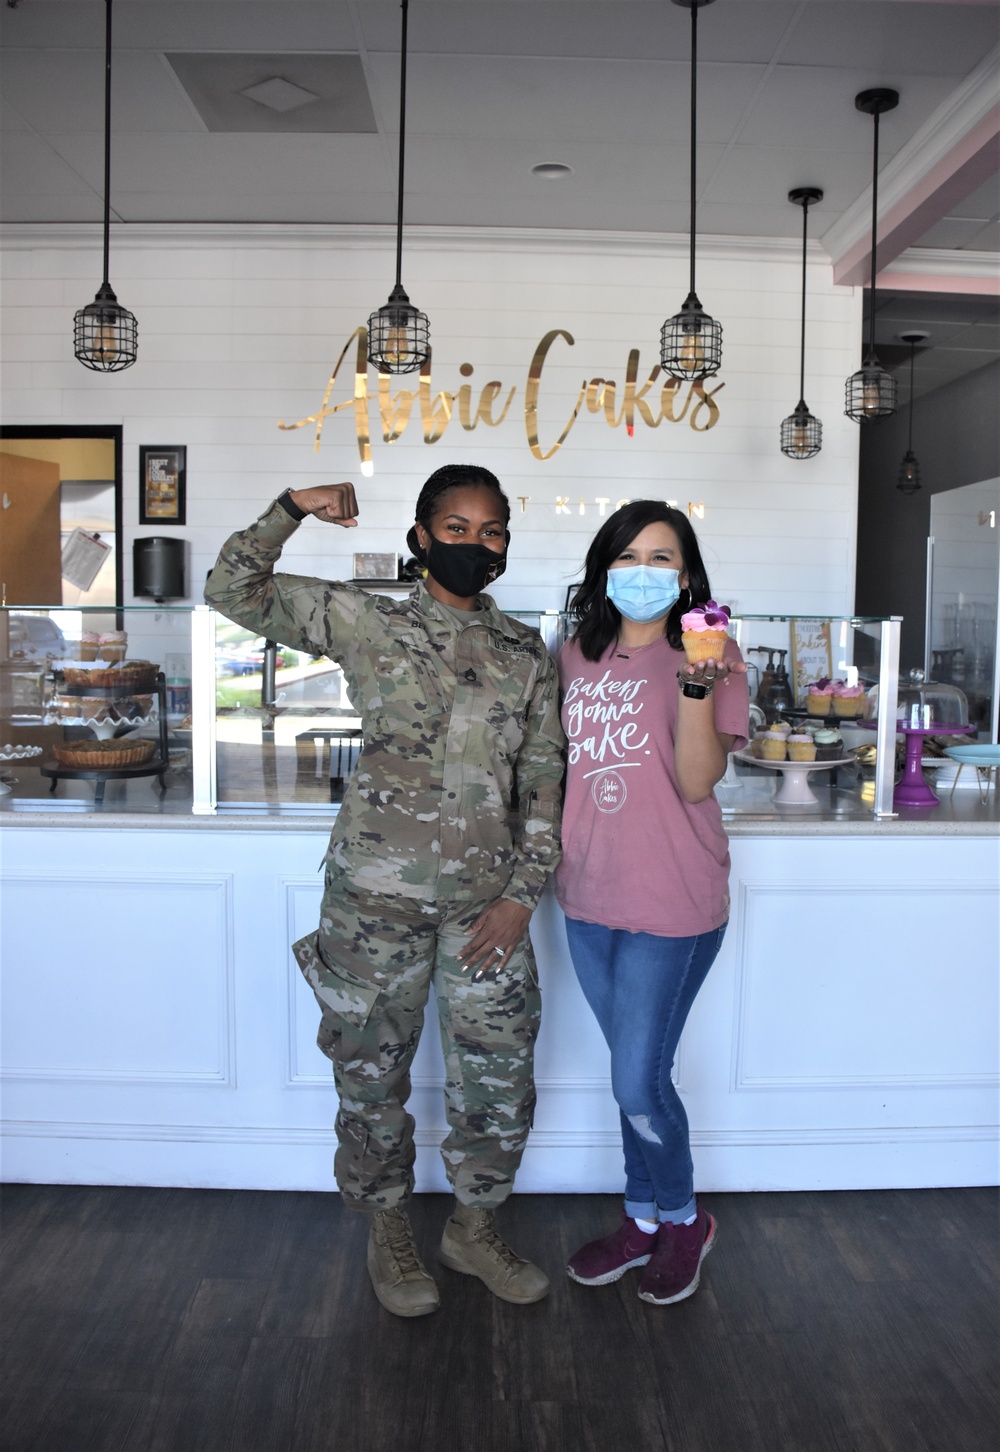 Abbie Cakes owner forms fresh ties with Army recruiting neighbors